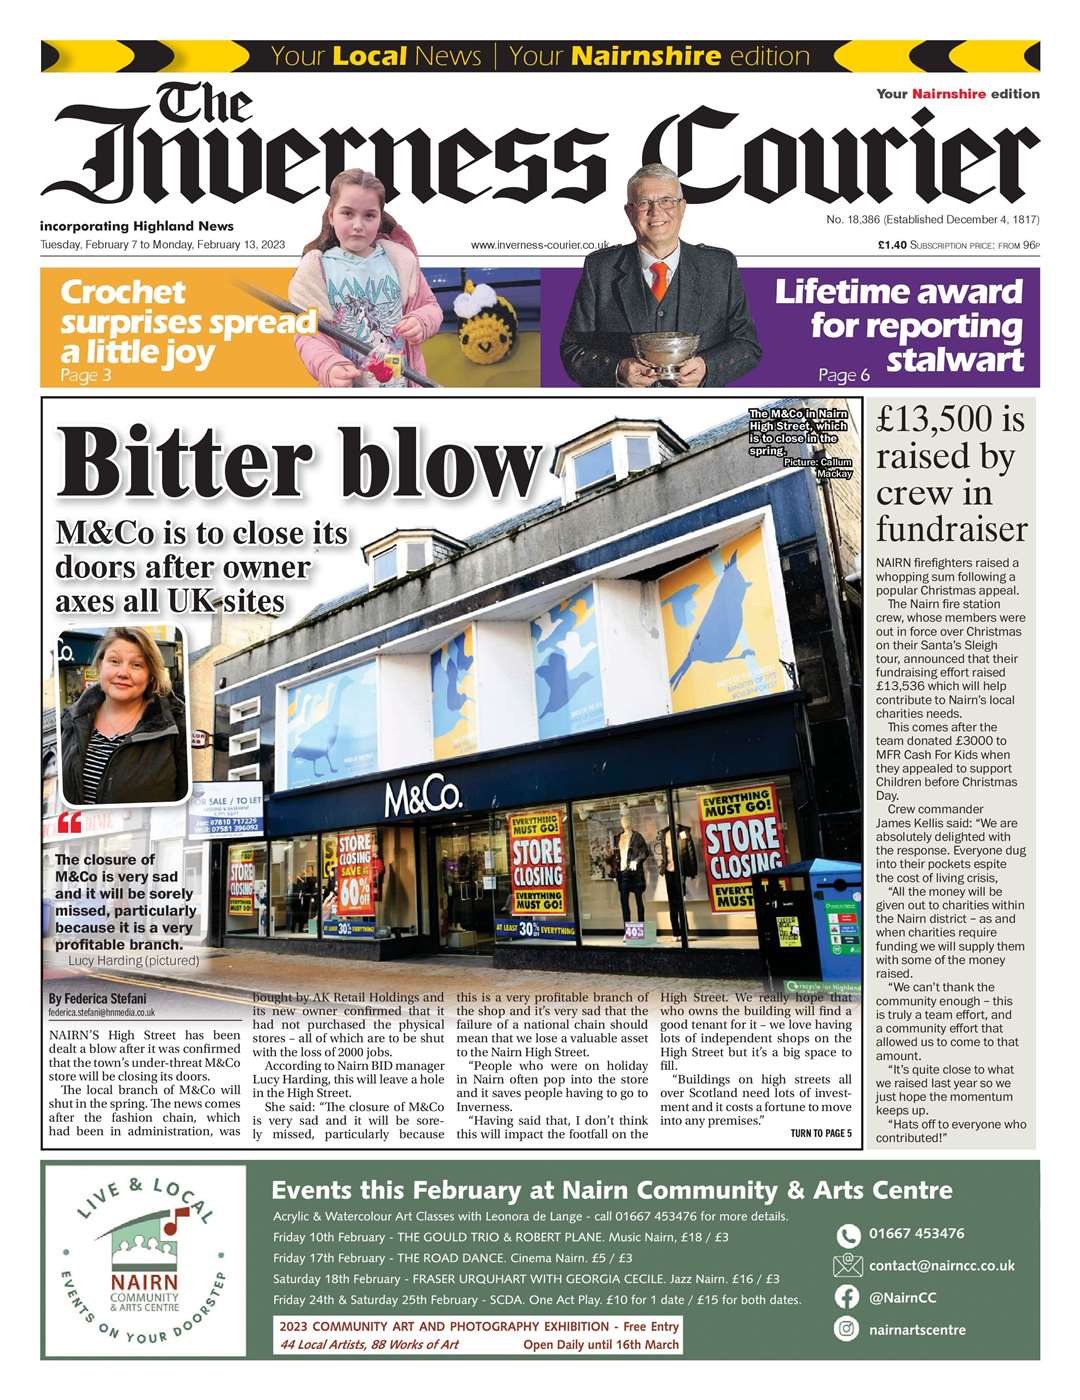 The Inverness Courier (Nairnshire edition), February 7, front page.